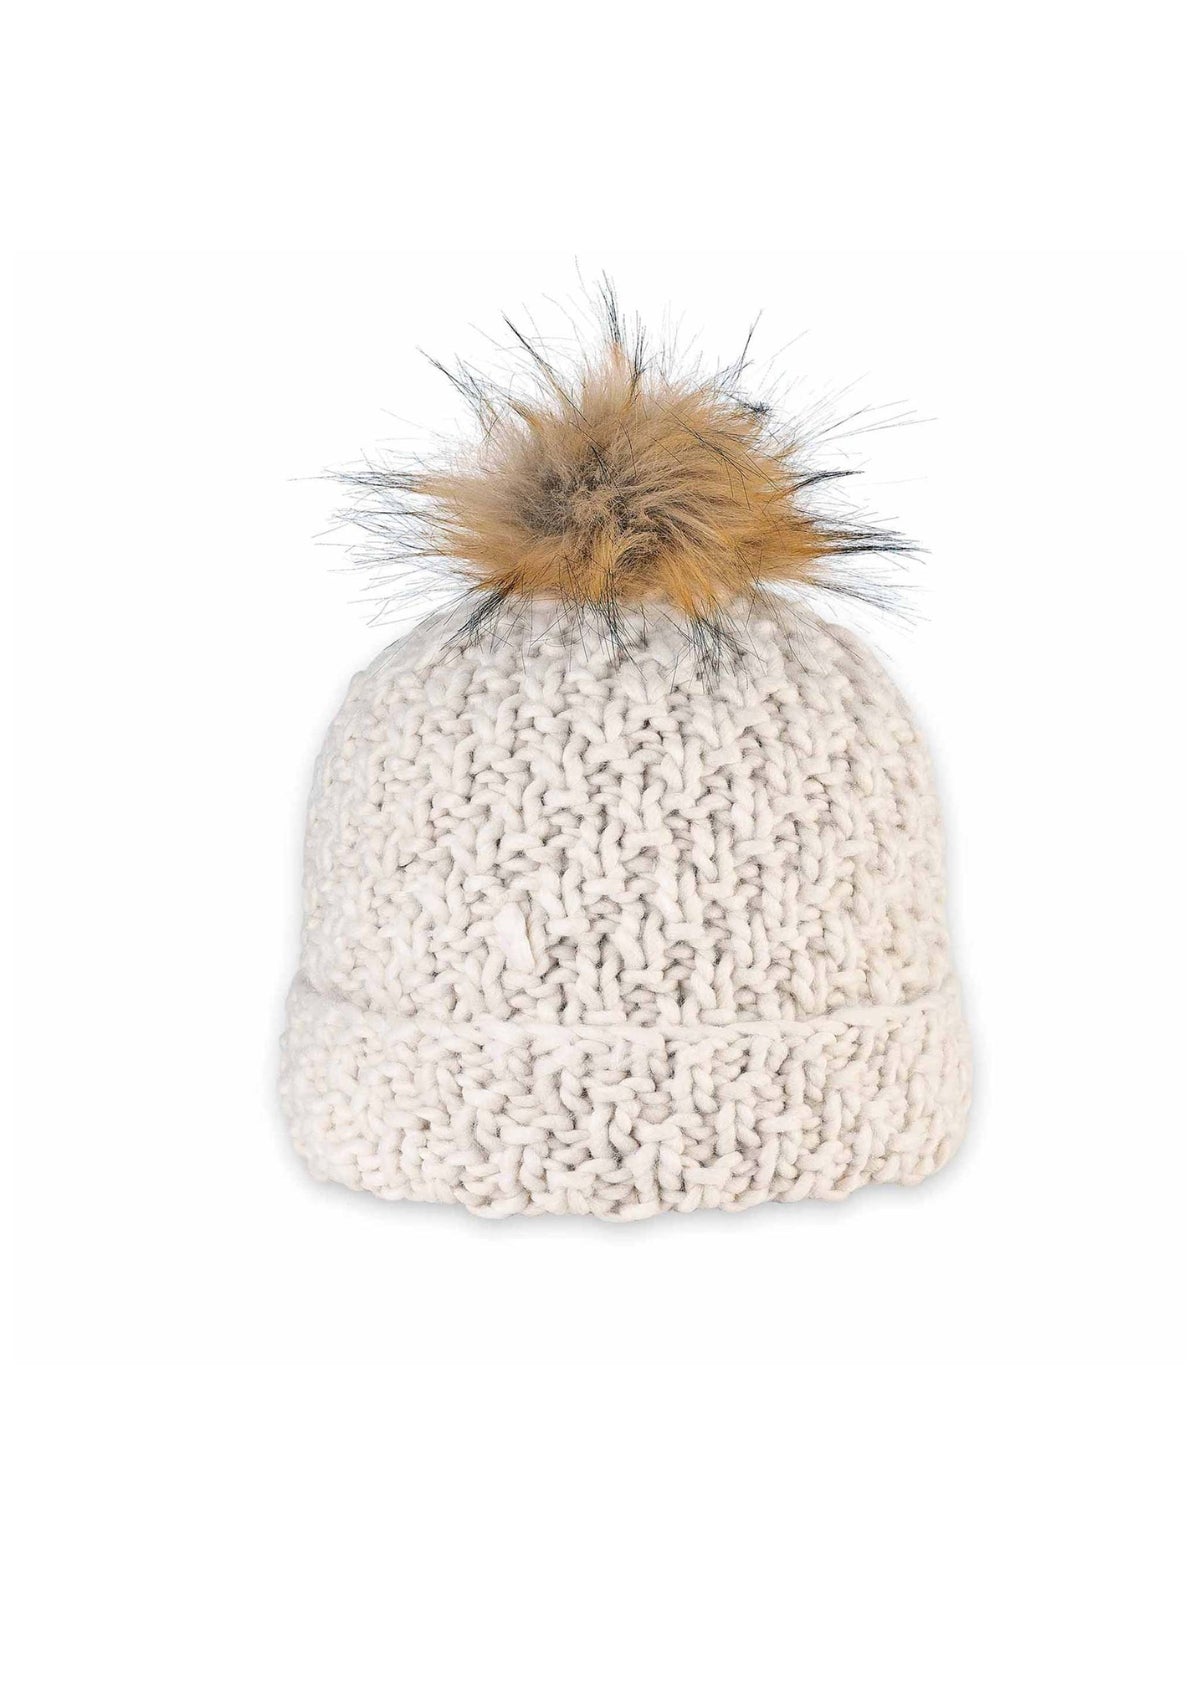 White knit beanie with fold and brown pompom that has black ends.